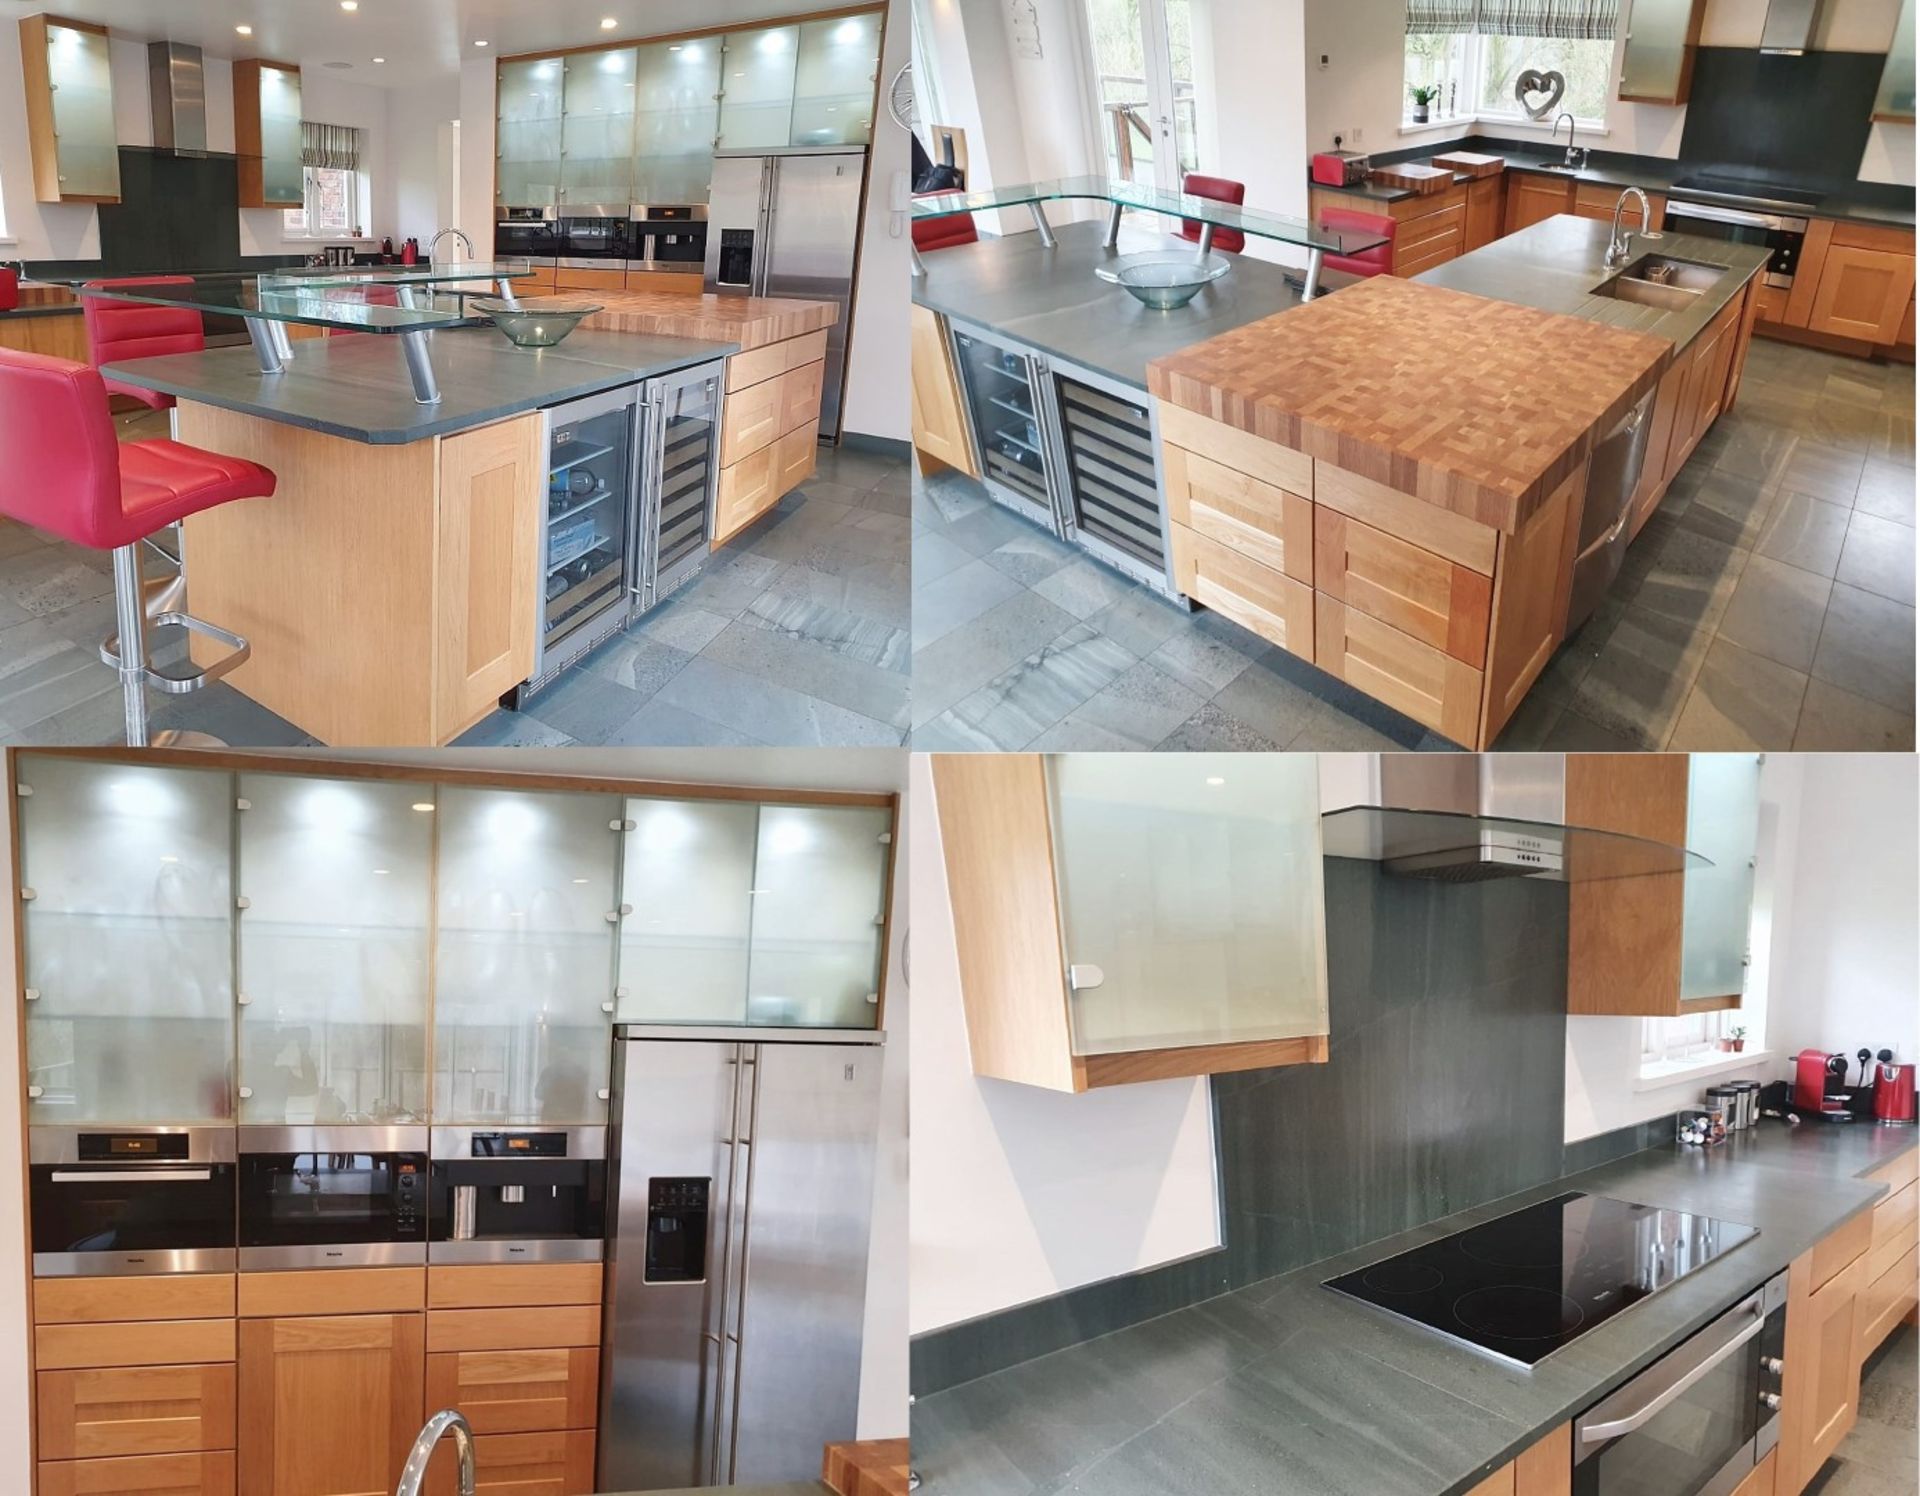 1 x Solid Oak Fitted Kitchen With Integrated Miele Appliances - CL487 - Location: Wigan *NO VAT*